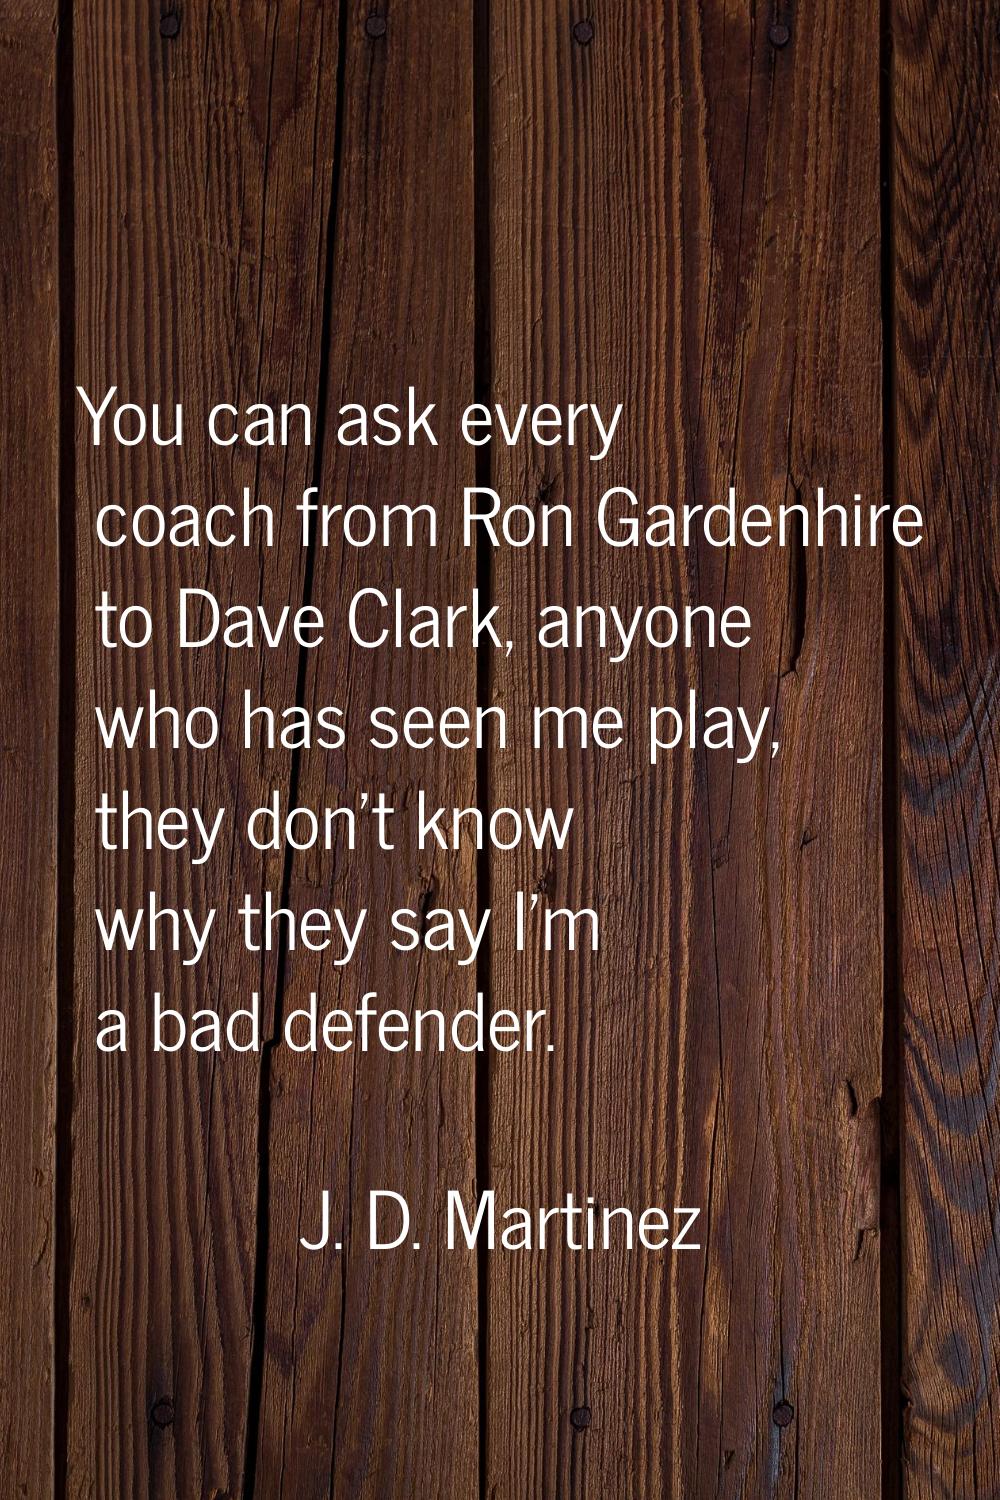 You can ask every coach from Ron Gardenhire to Dave Clark, anyone who has seen me play, they don't 